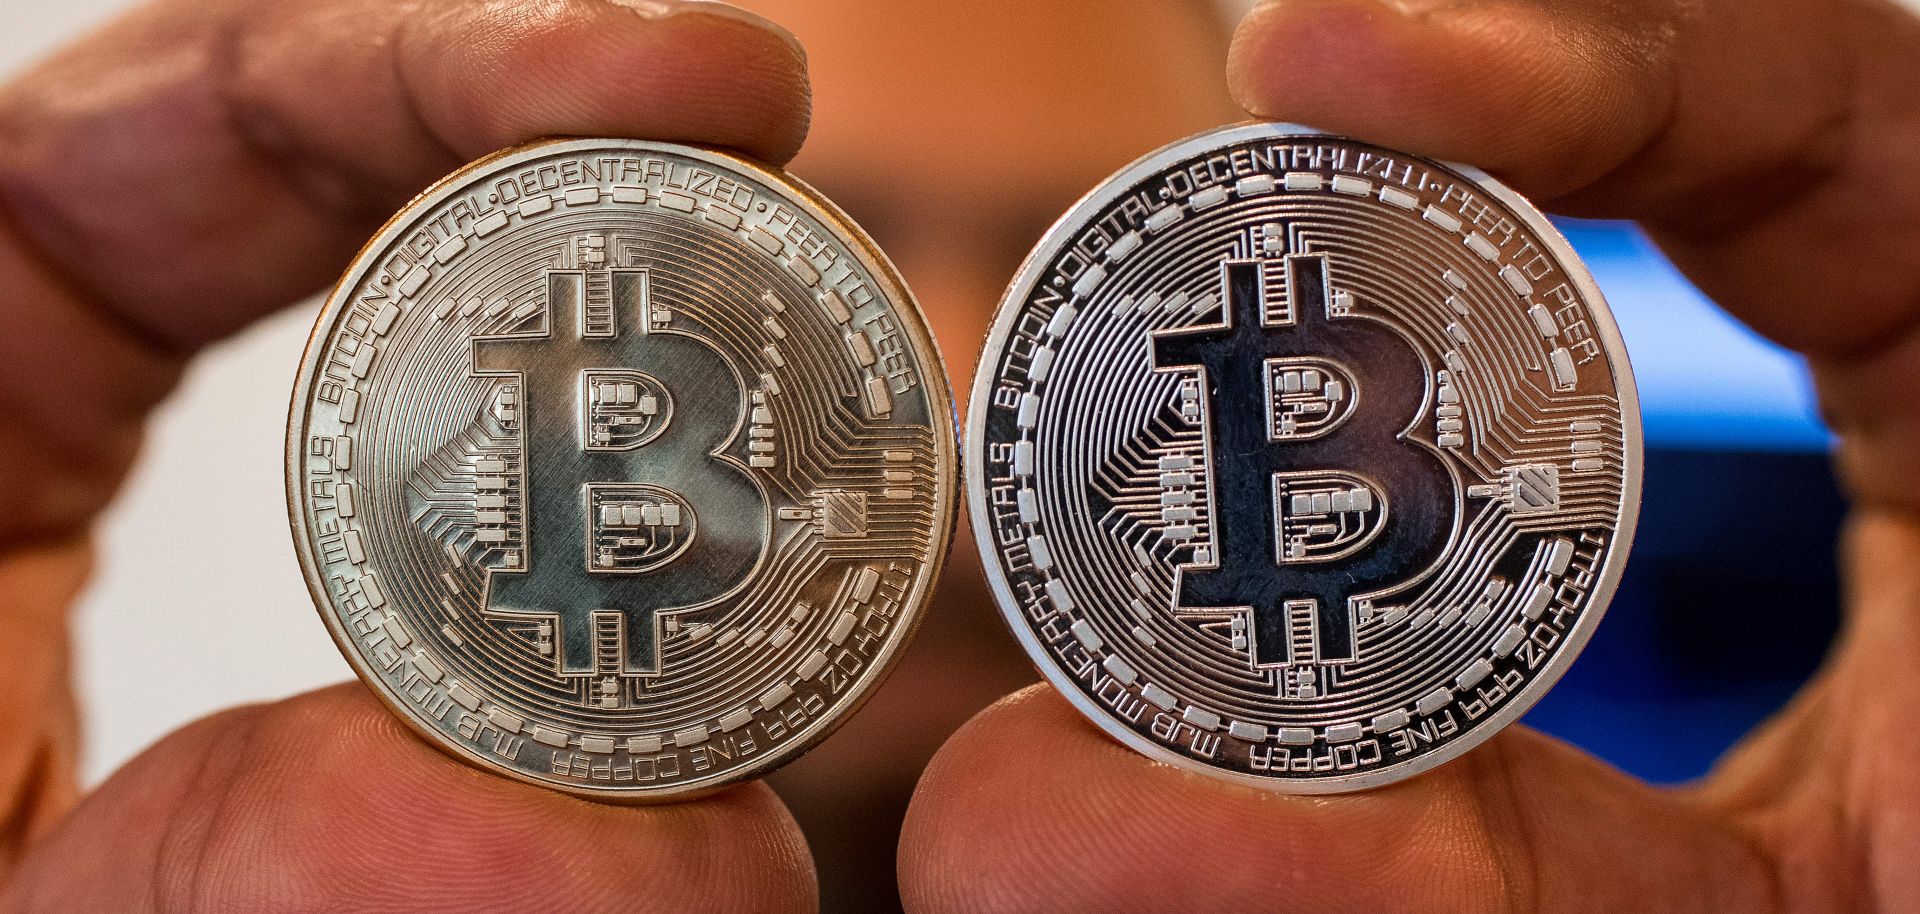 A person holds a visual representation of Bitcoin on Feb. 6, 2018, at the 'Bitcoin Change' shop in the Israeli city of Tel Aviv.